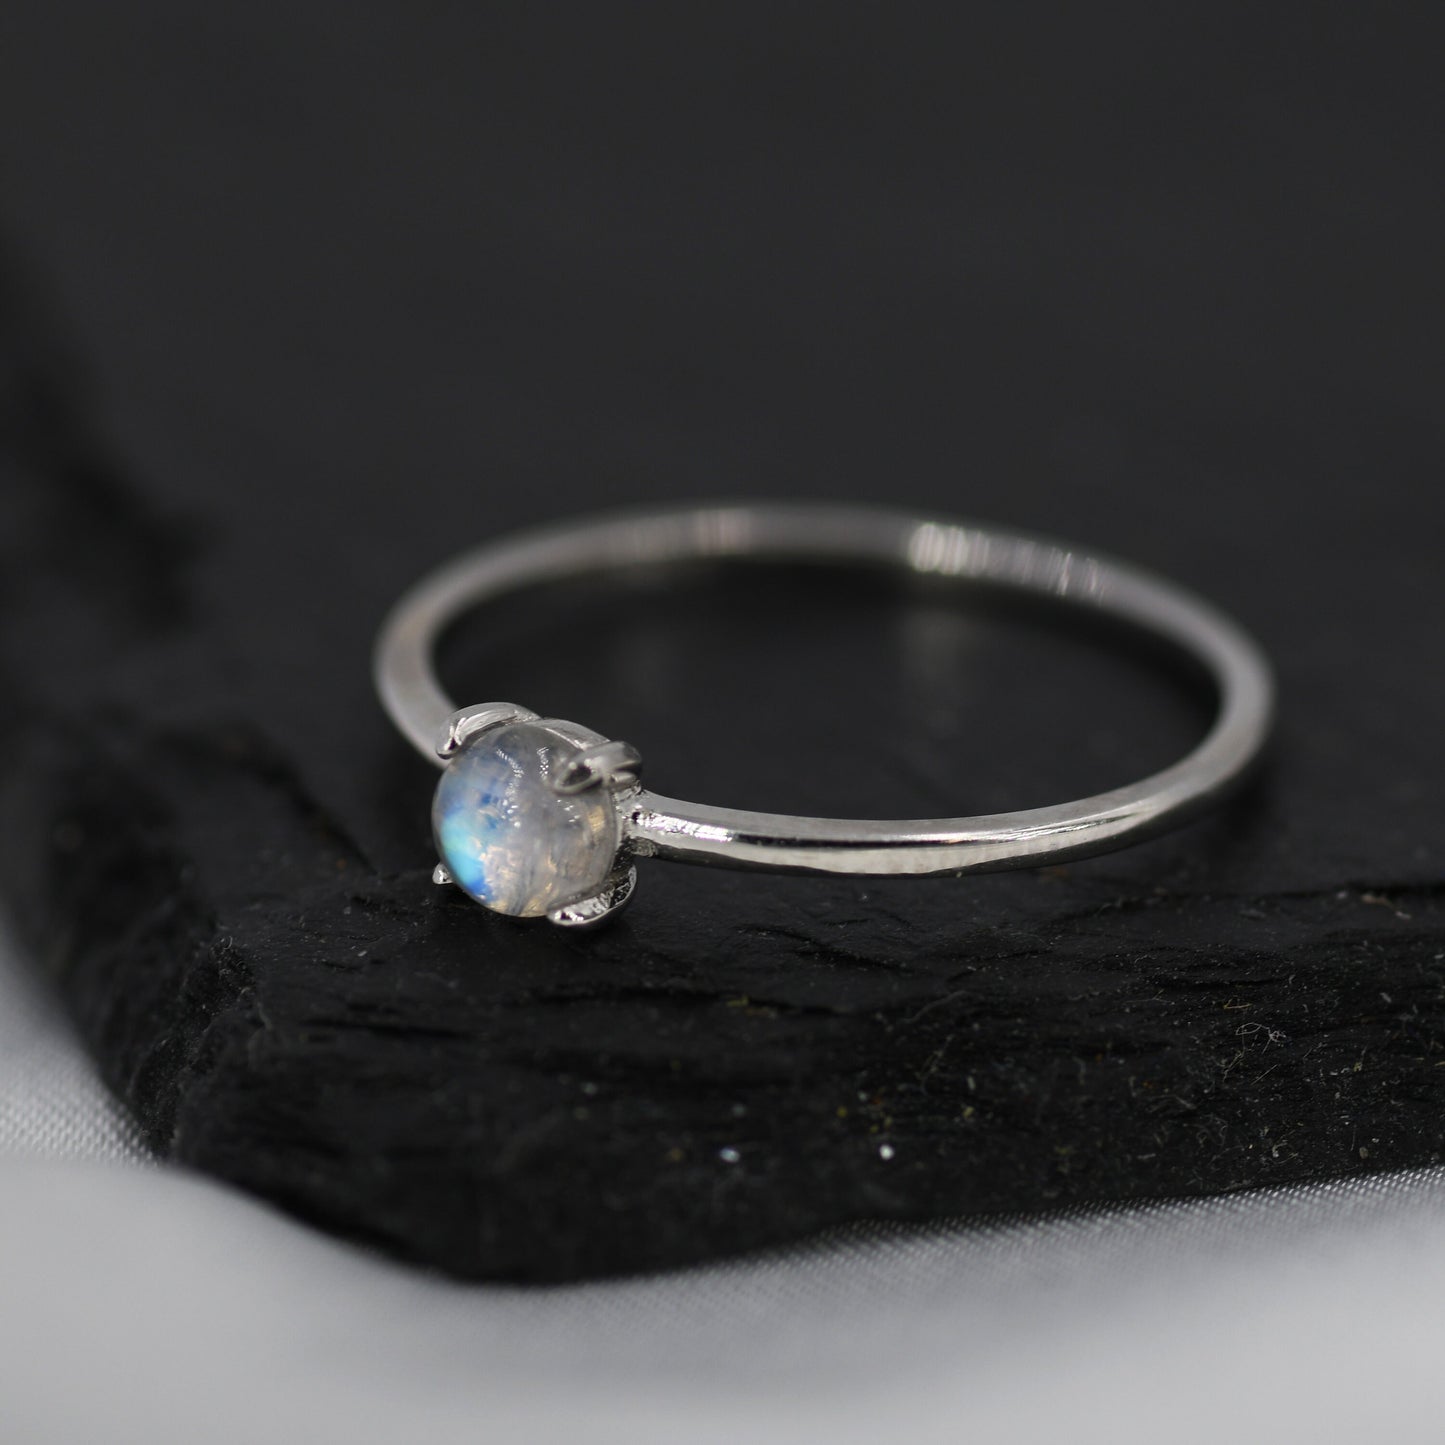 Genuine Moonstone Ring in Sterling Silver, US 5 - 8, Natural Moonstone Ring